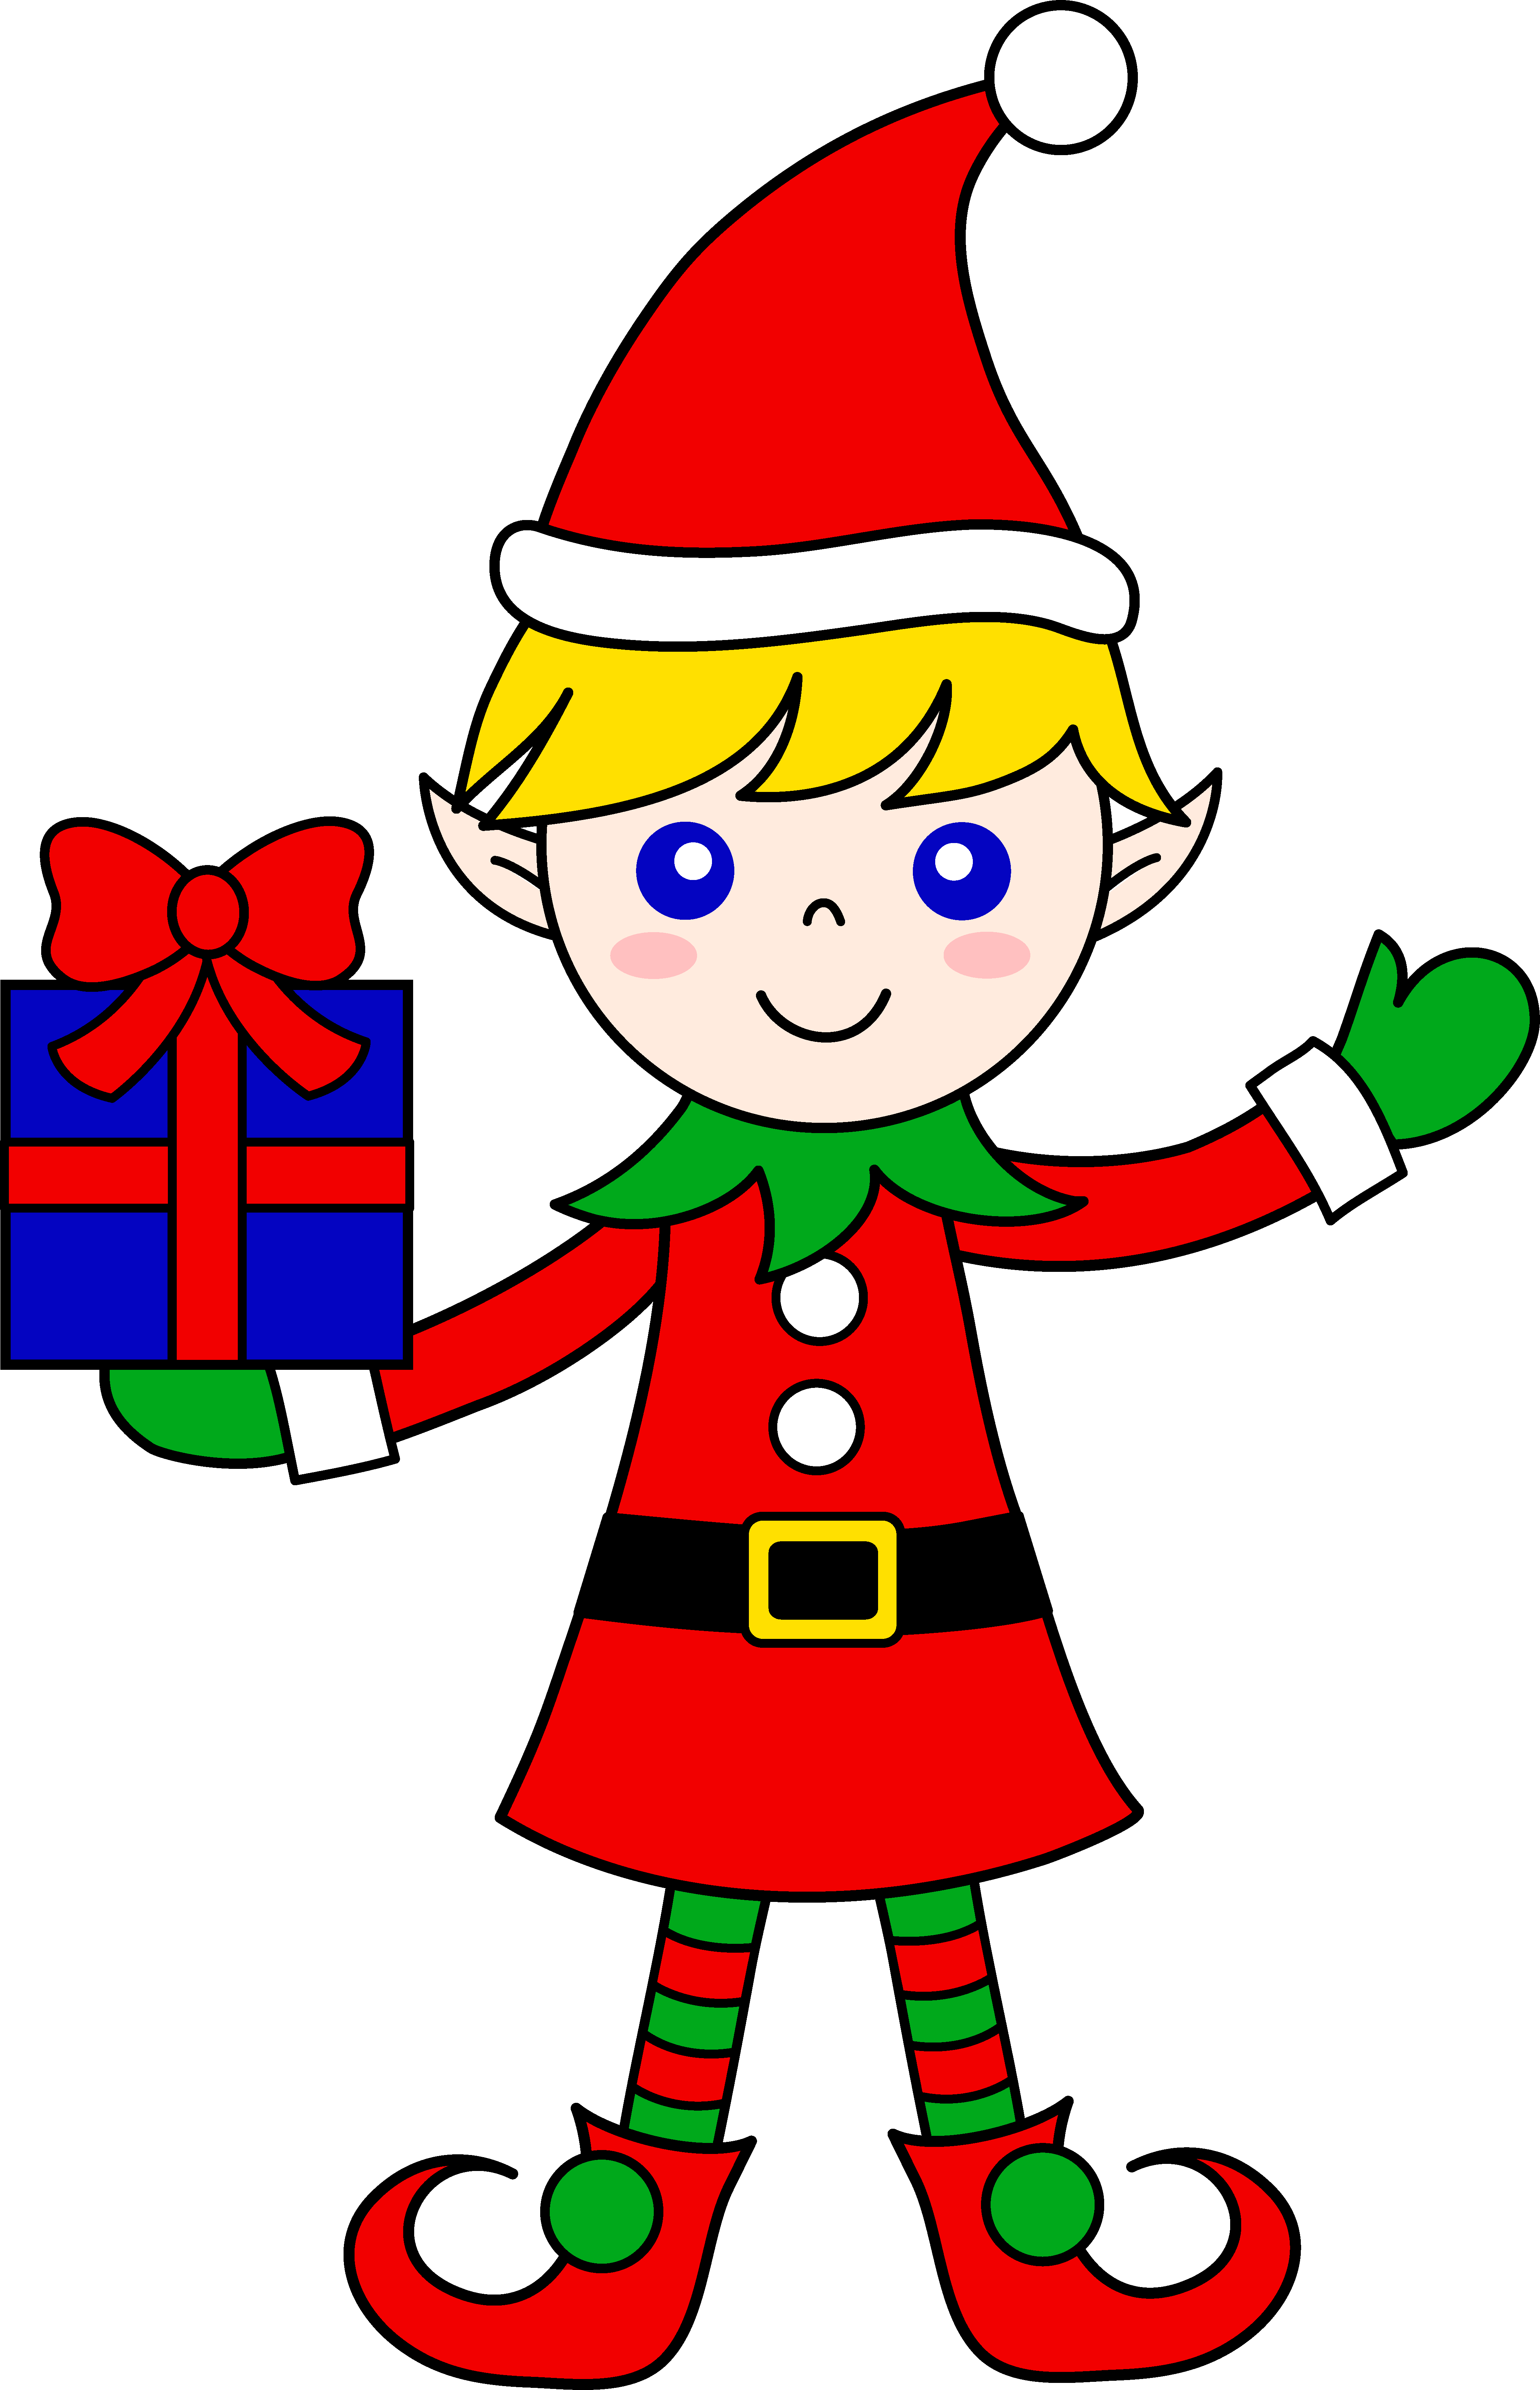 Free Christmas Elves Image, Download Free Clip Art, Free